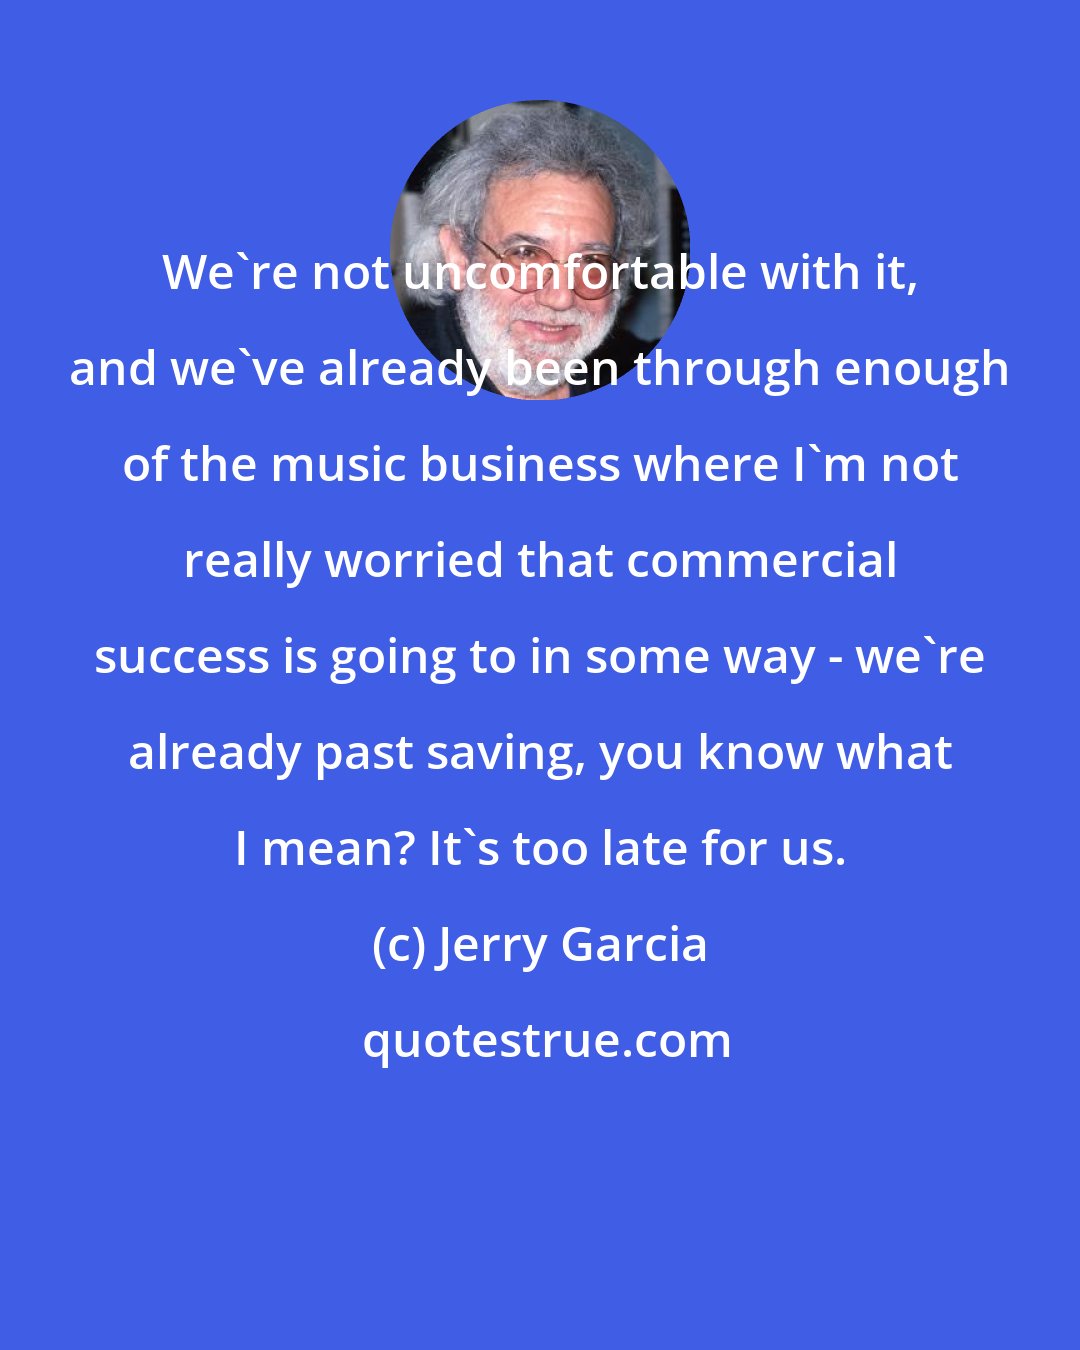 Jerry Garcia: We're not uncomfortable with it, and we've already been through enough of the music business where I'm not really worried that commercial success is going to in some way - we're already past saving, you know what I mean? It's too late for us.